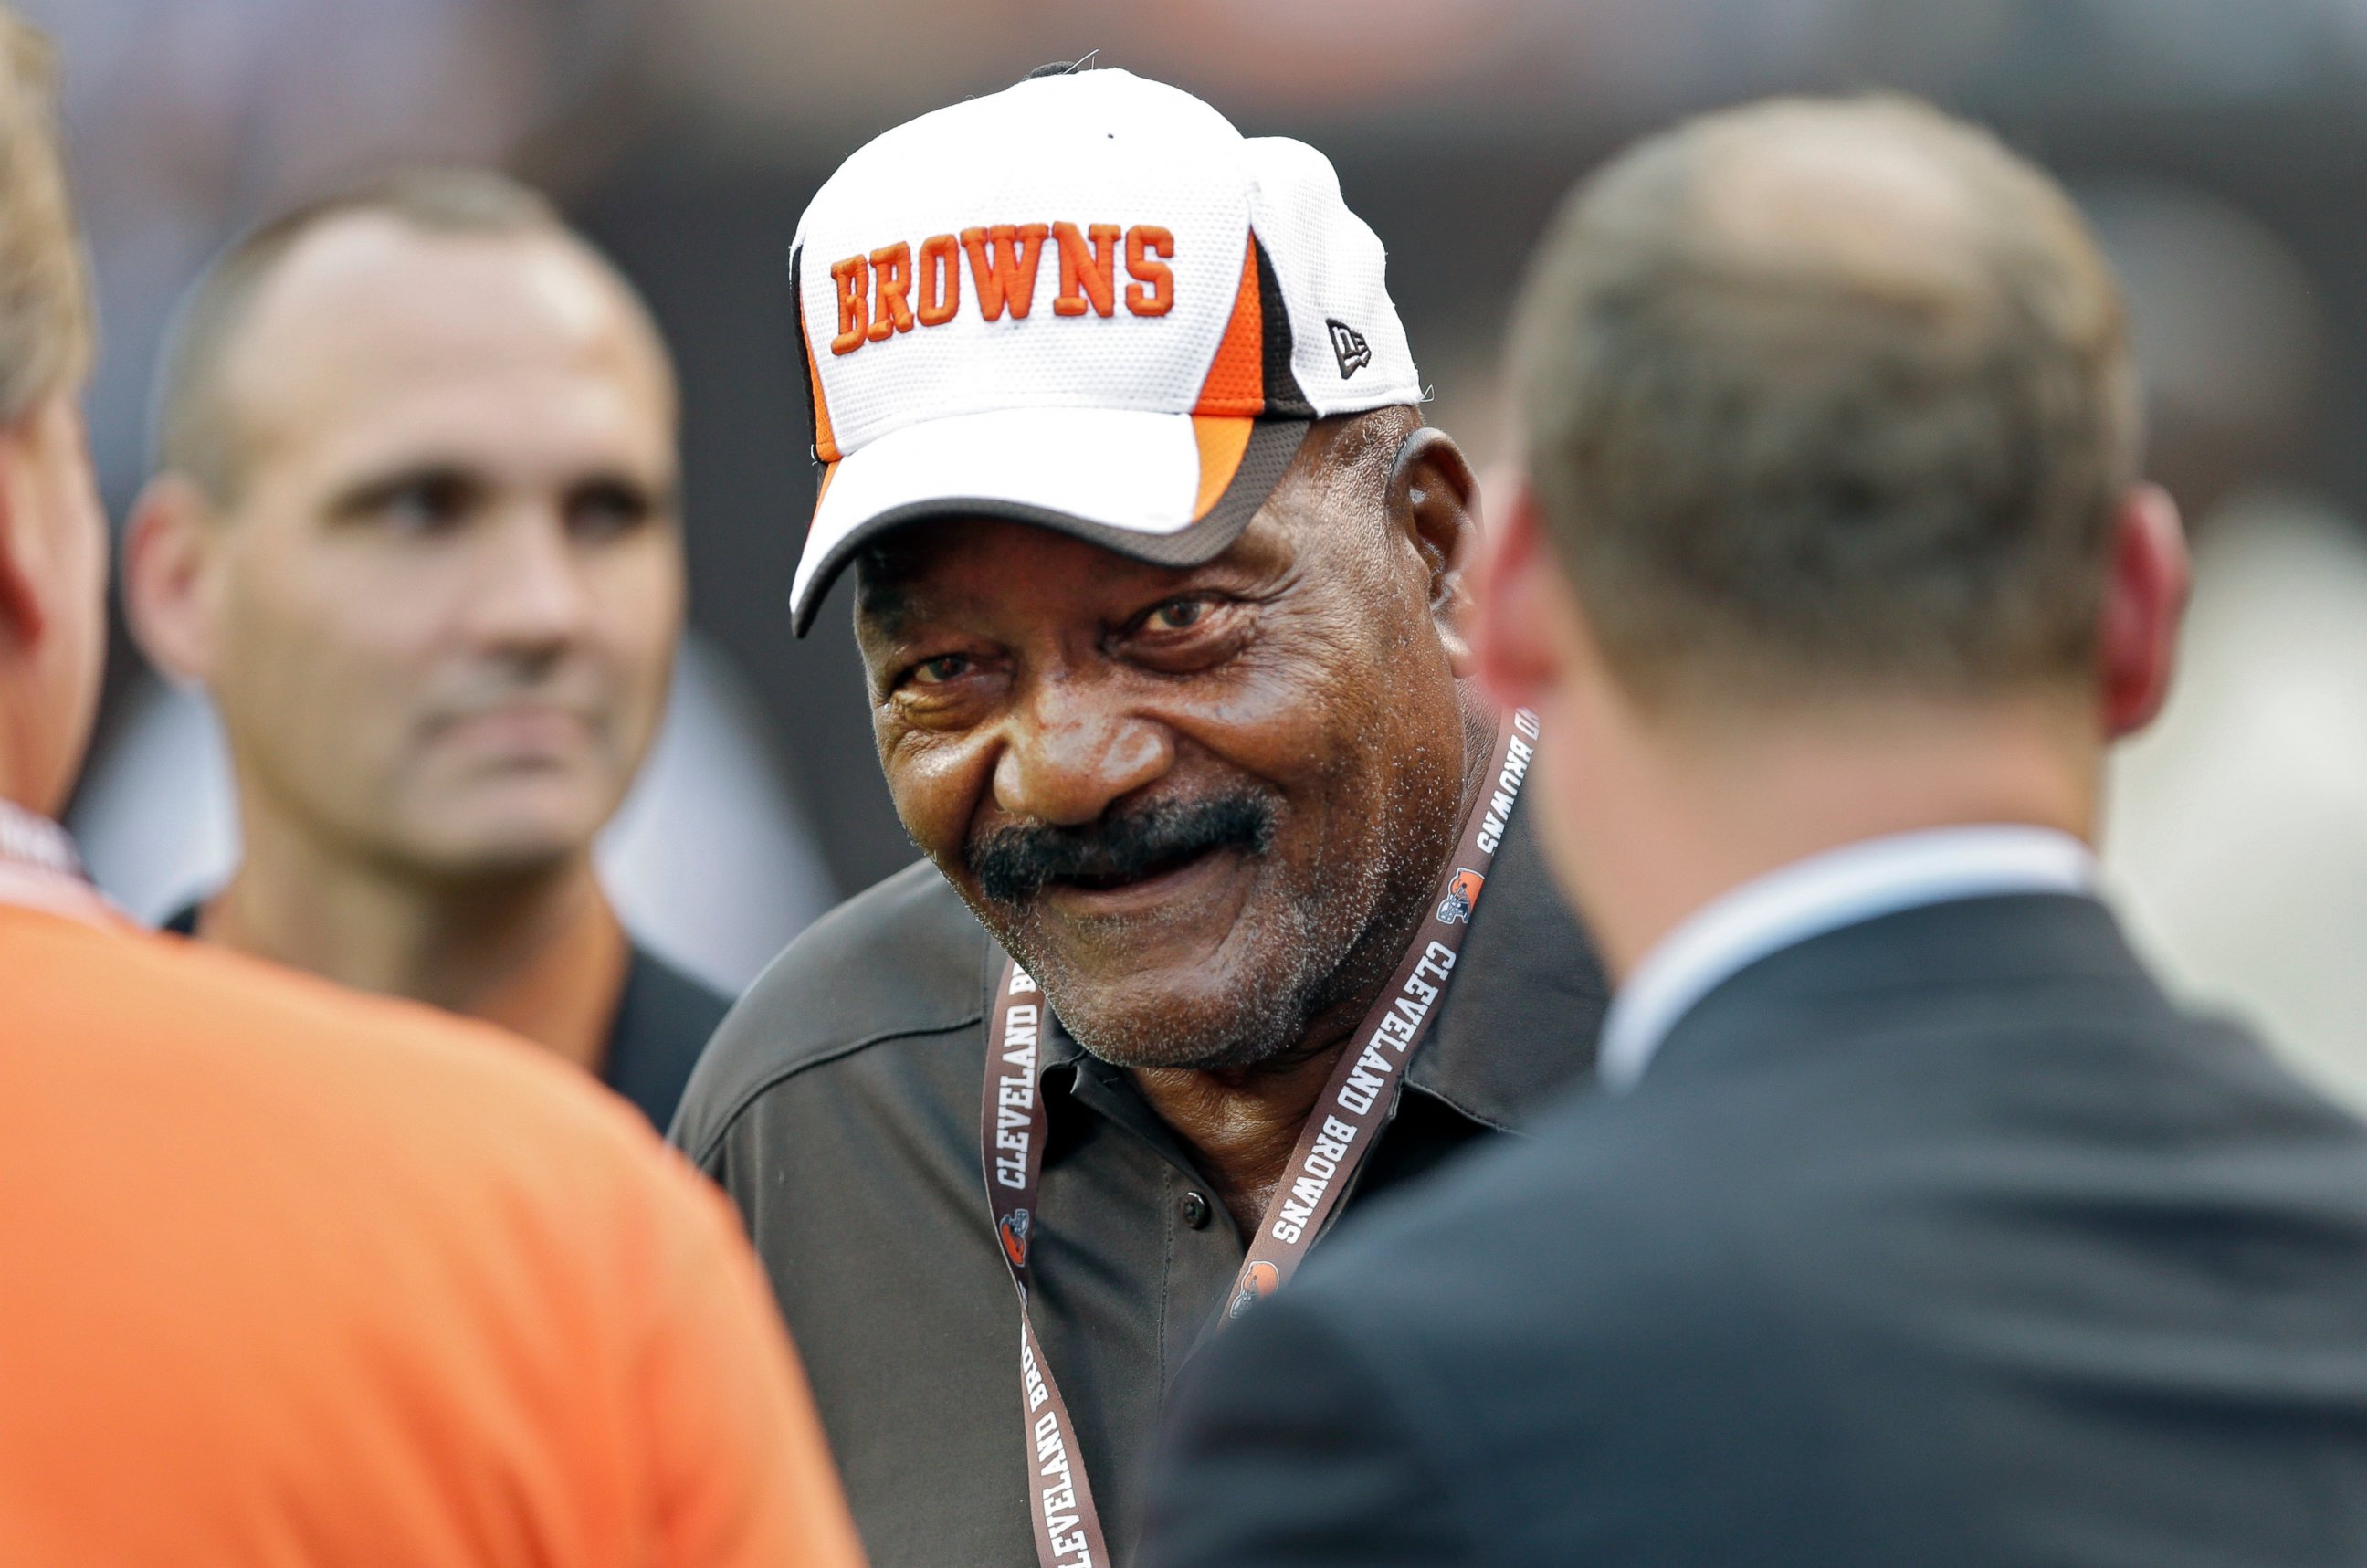 PHOTO: In this Thursday, Aug. 8, 2013 file photo, Hall of Fame running back Jim Brown visits on the sidelines before a preseason NFL football game between the St. Louis Rams and Cleveland Browns in Cleveland.